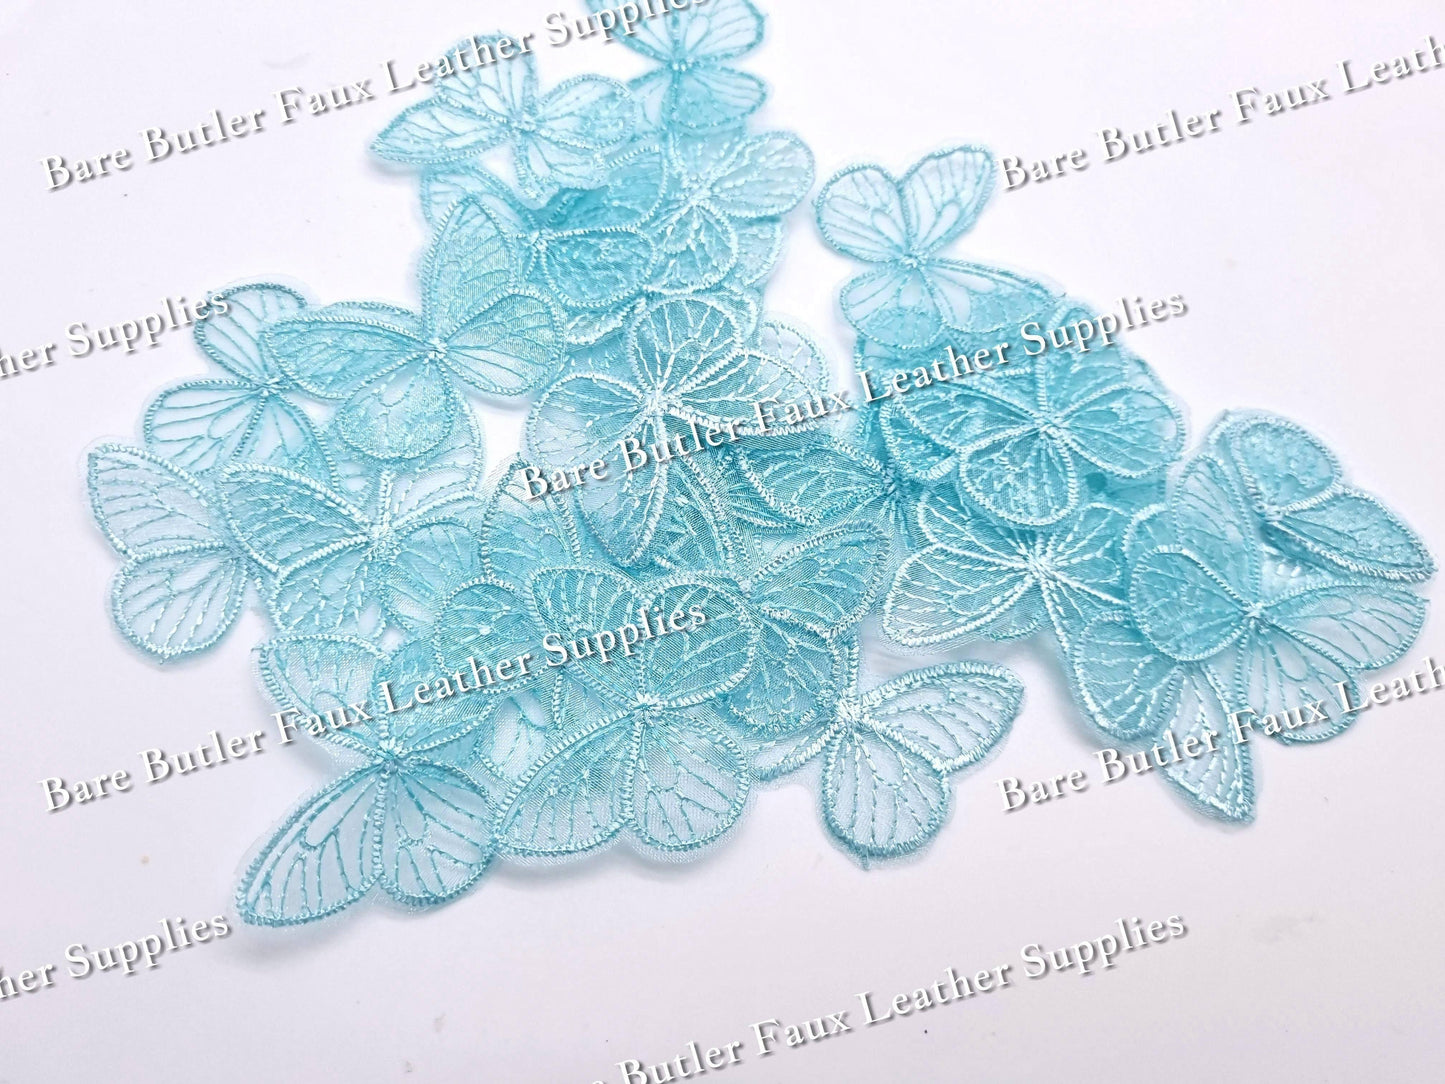 Lace Butterfly Embellishments - accessories, Butterfly, Embelishment, lace - Bare Butler Faux Leather Supplies 